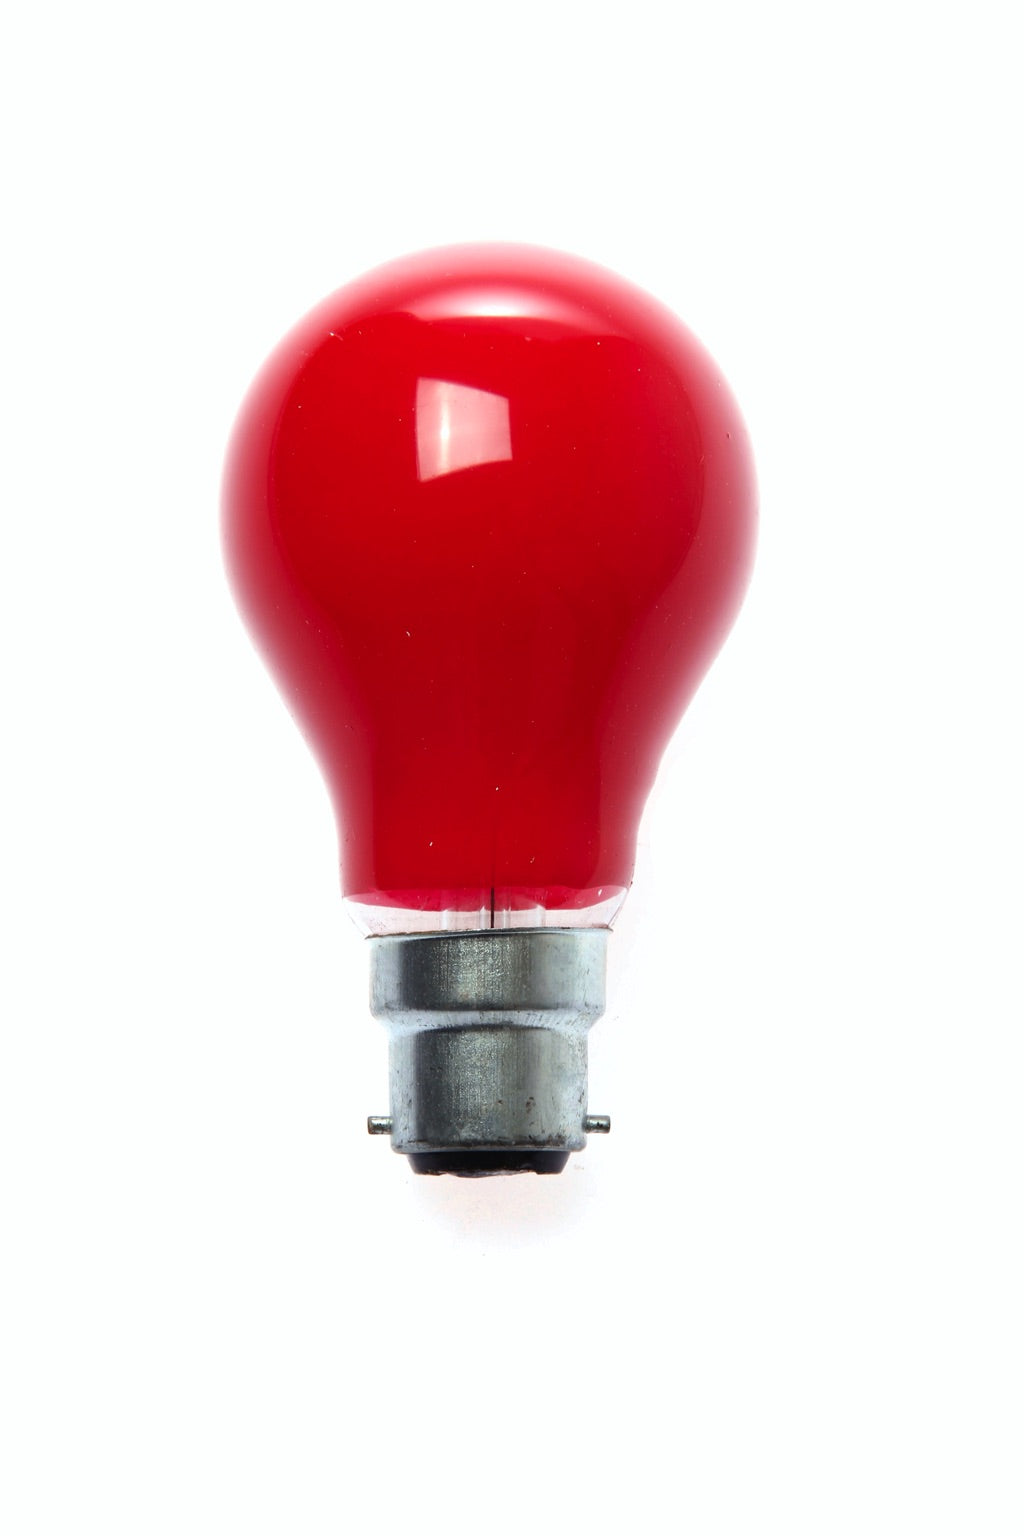 790347-LAMP COLORED B-22, 220-240V 40W RED